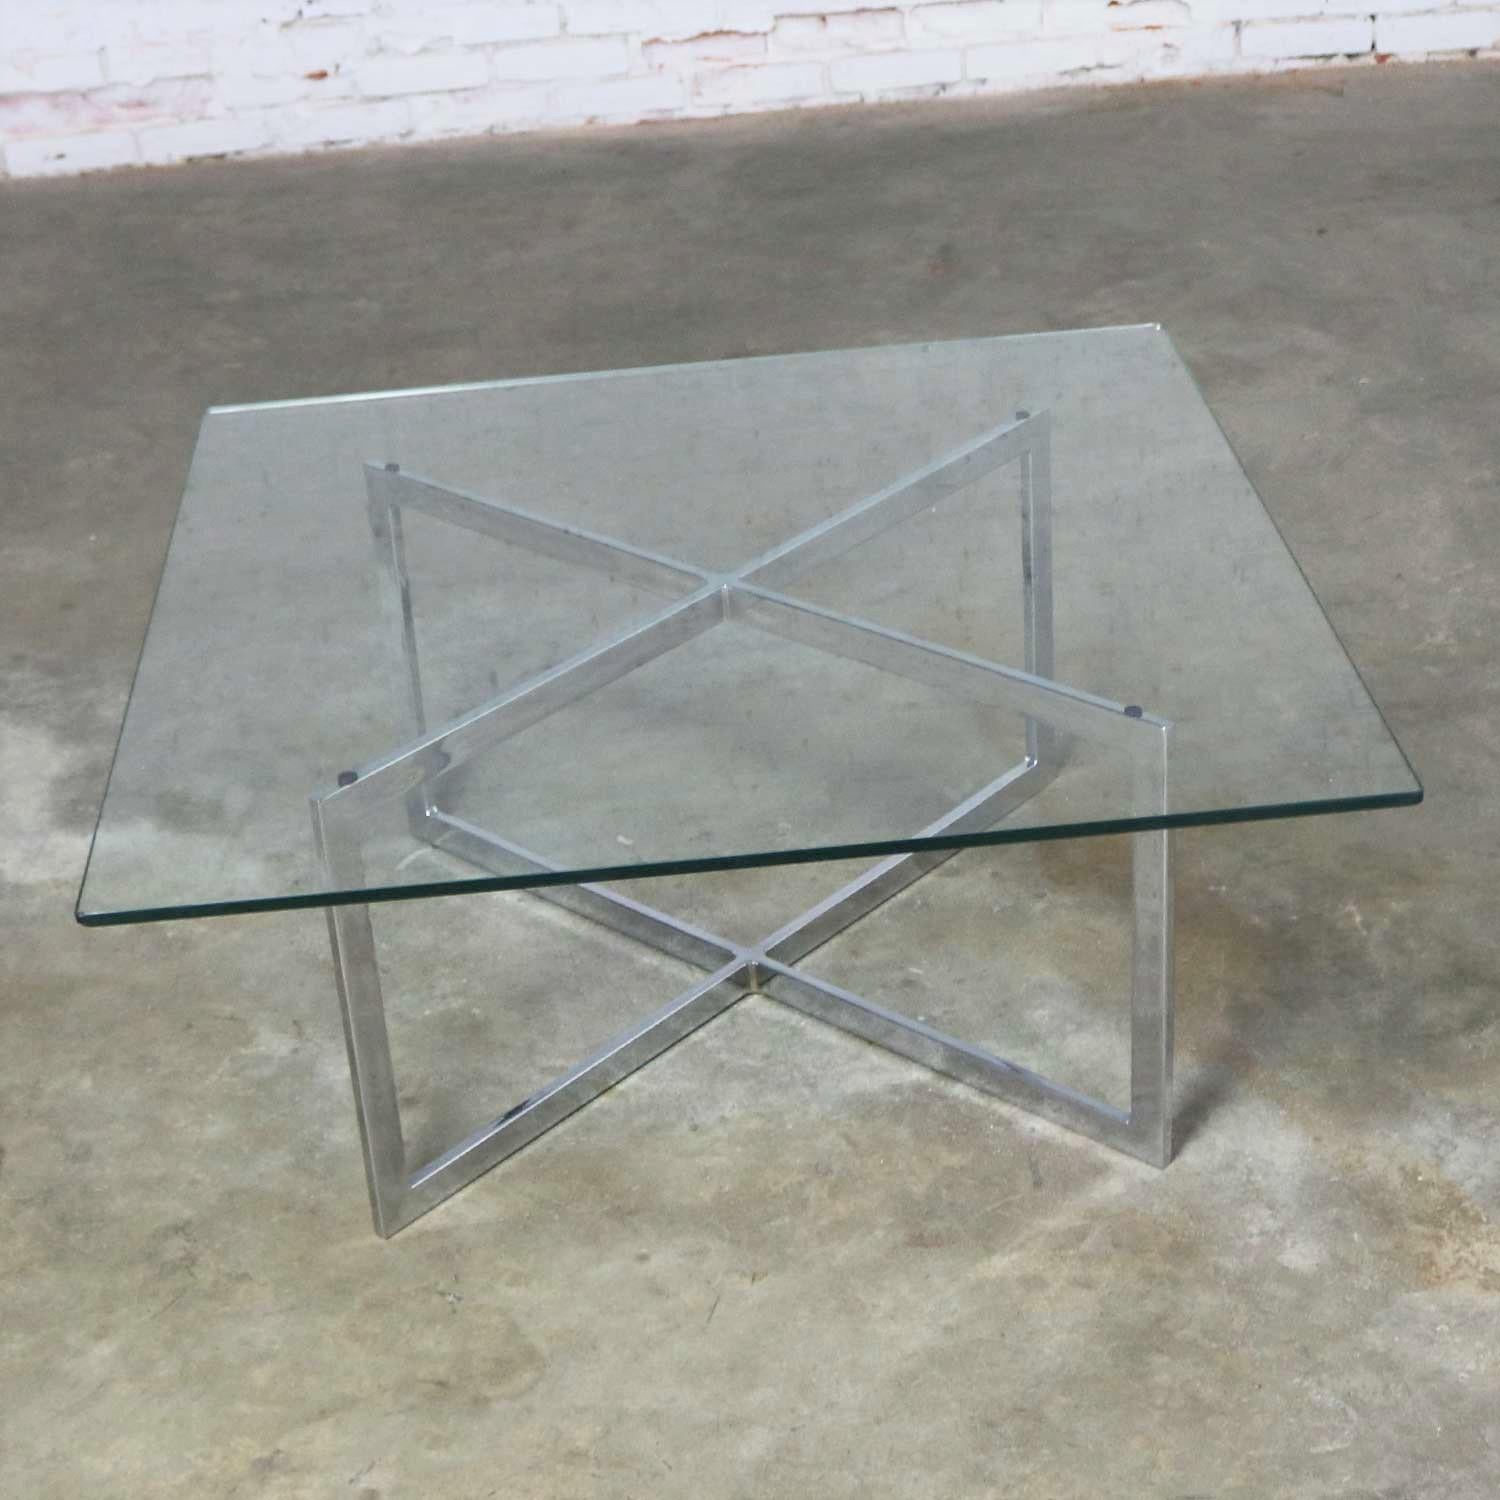 Handsome square coffee table with a rectangular tube chrome X-base and 3/8 inch glass top. Unmarked but styled after Milo Baughman. Although, we do have the original sales receipt for this table from Tri-Mark Designs in Philadelphia dated January